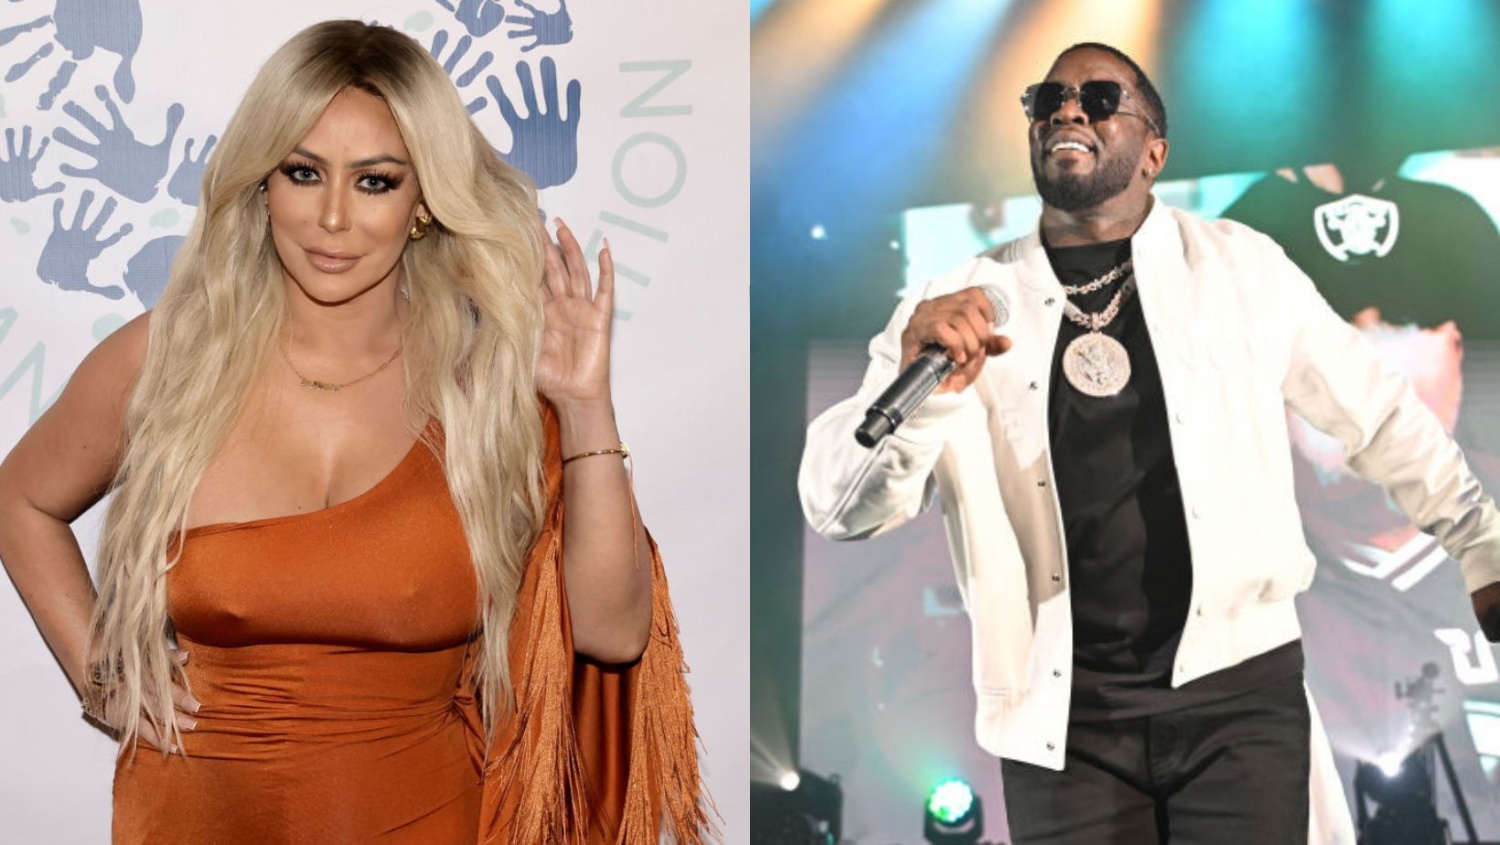 Aubrey O'Day's Smug Response to Sean 'Diddy' Combs' Home Raids: 'What You Sow, You Shall Reap'